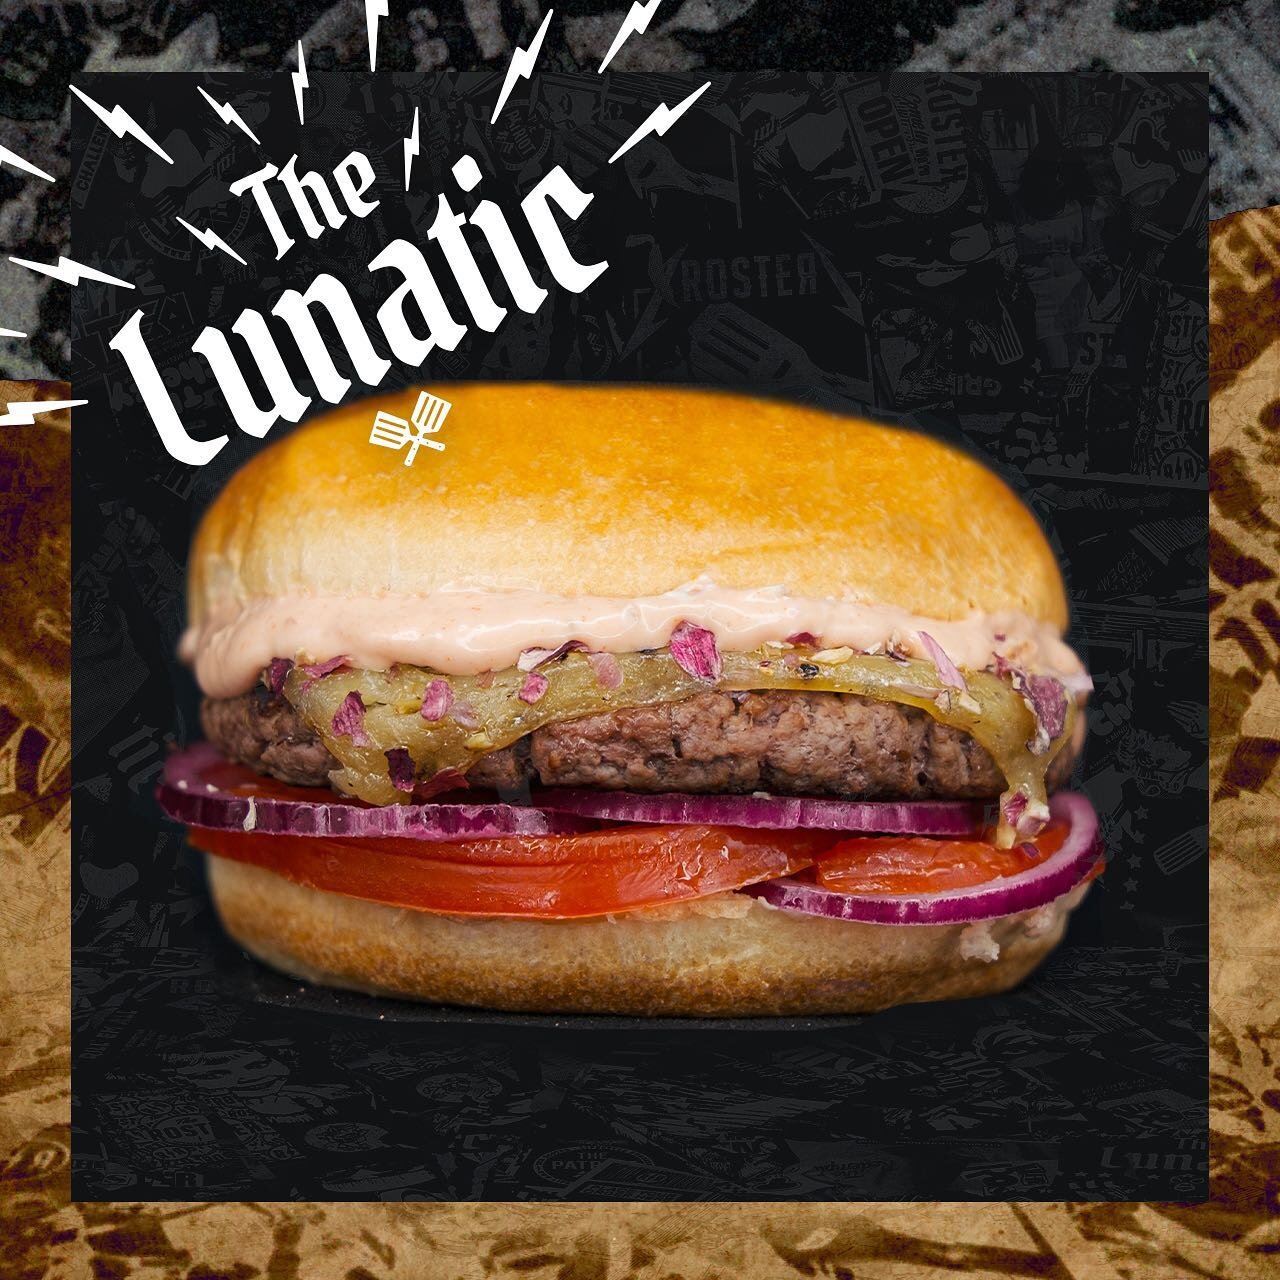 Le Lunatic de la semaine 👉🏻 Boeuf, Monterey Jack, Echalotes Flakes, Tomates, Oignons Rouges &amp; Sauce Roster 🍔⁠
⁠
⁠
⁠
⁠
⁠
⁠
#theroster #lifestyleburgers #supportlocal #annecy #chambery #lyon #chamonix #chamonixmontblanc #restaurantannecy #annecy